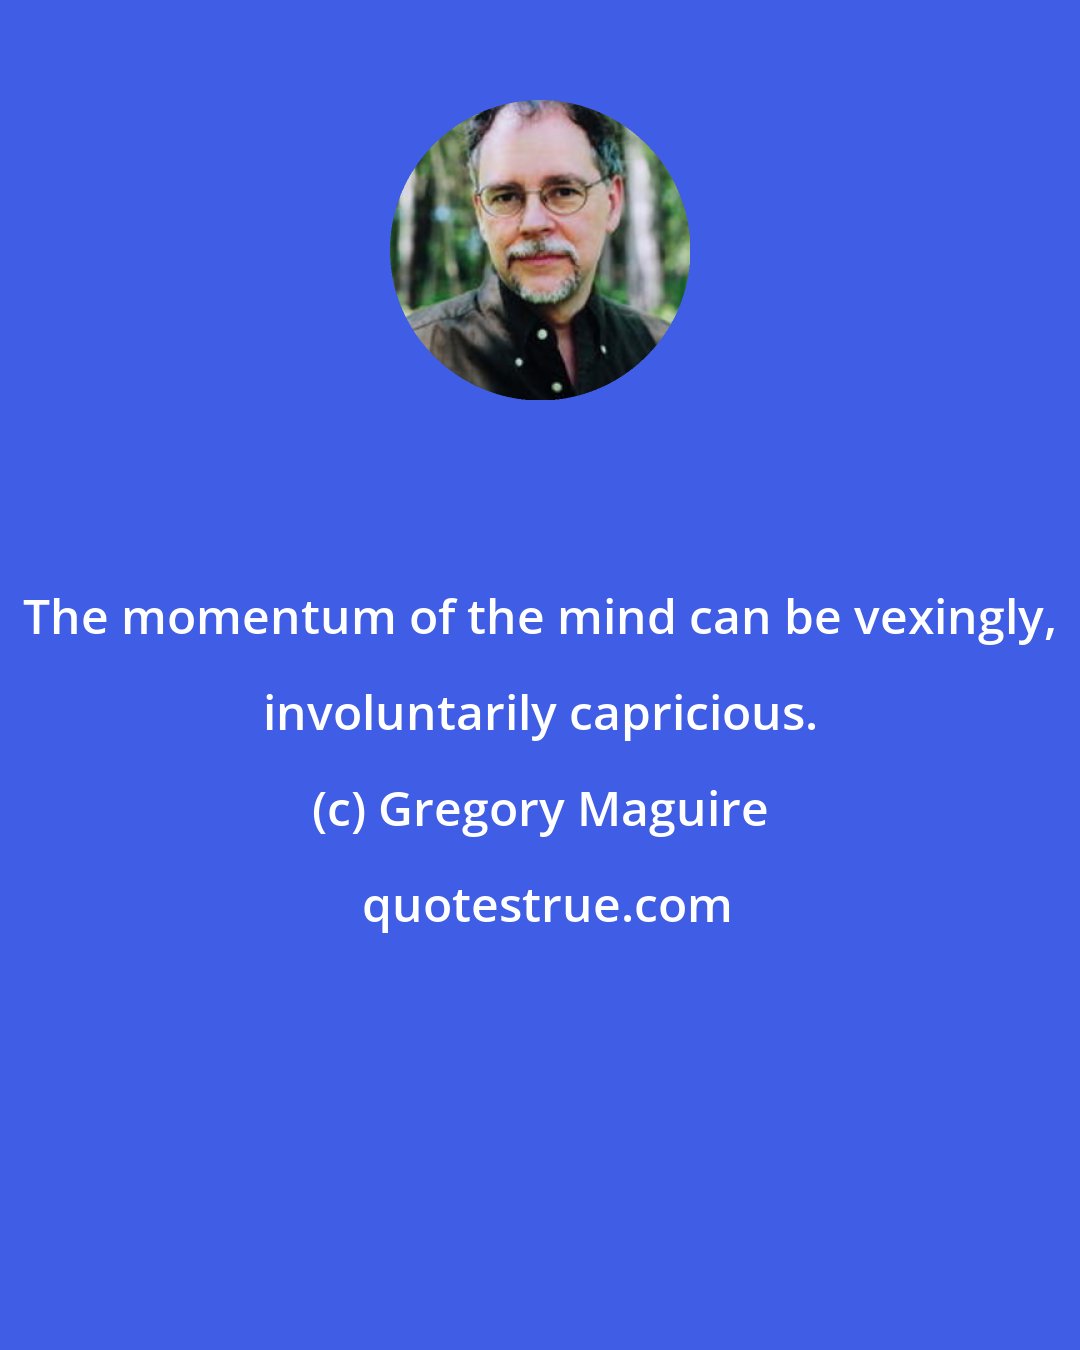 Gregory Maguire: The momentum of the mind can be vexingly, involuntarily capricious.